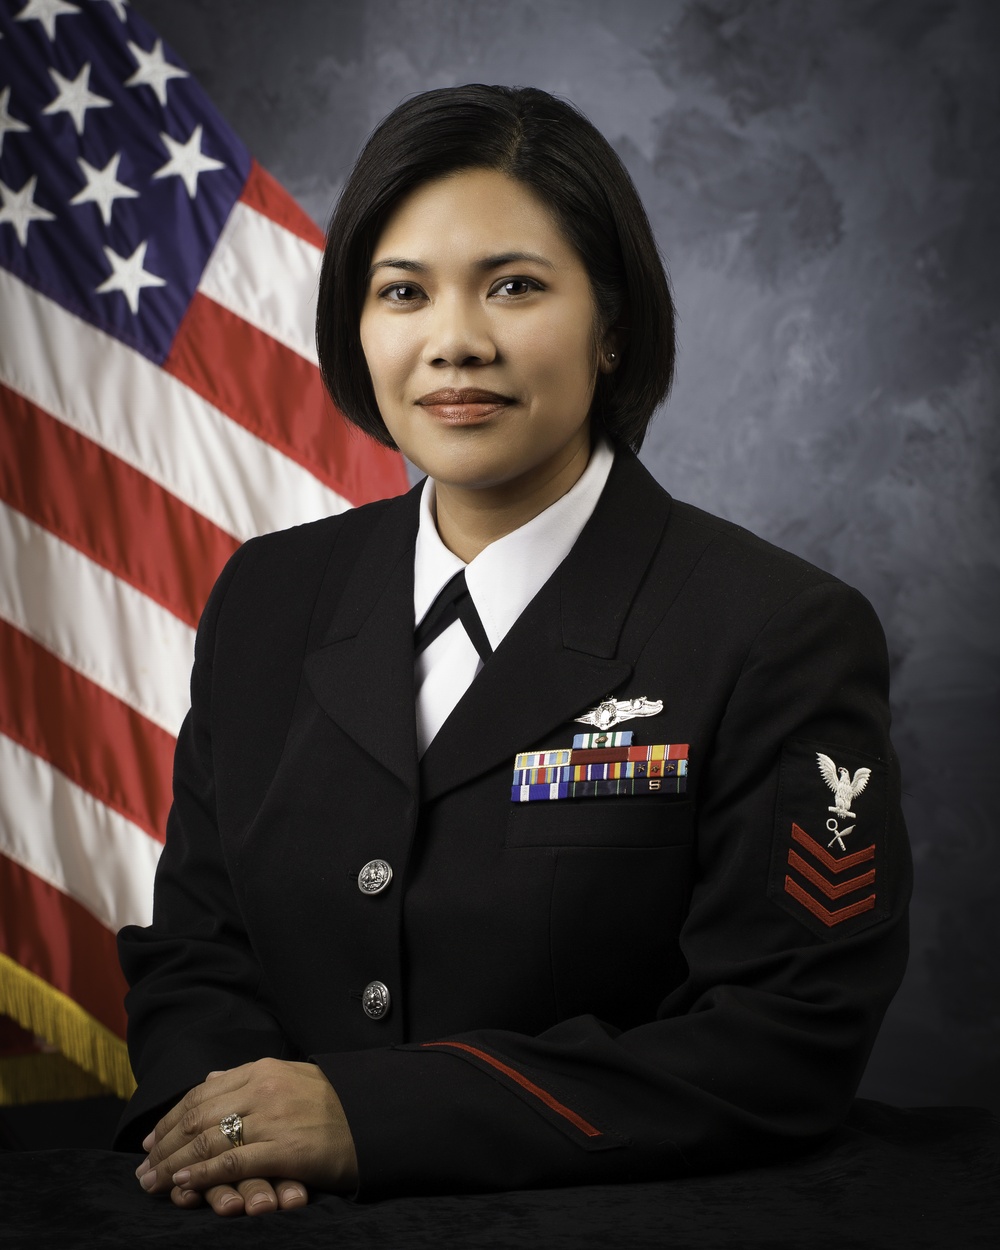 Official portrait, Intelligence Specialist 1st Class Marlo V. Perlas, United States Naval Reserve